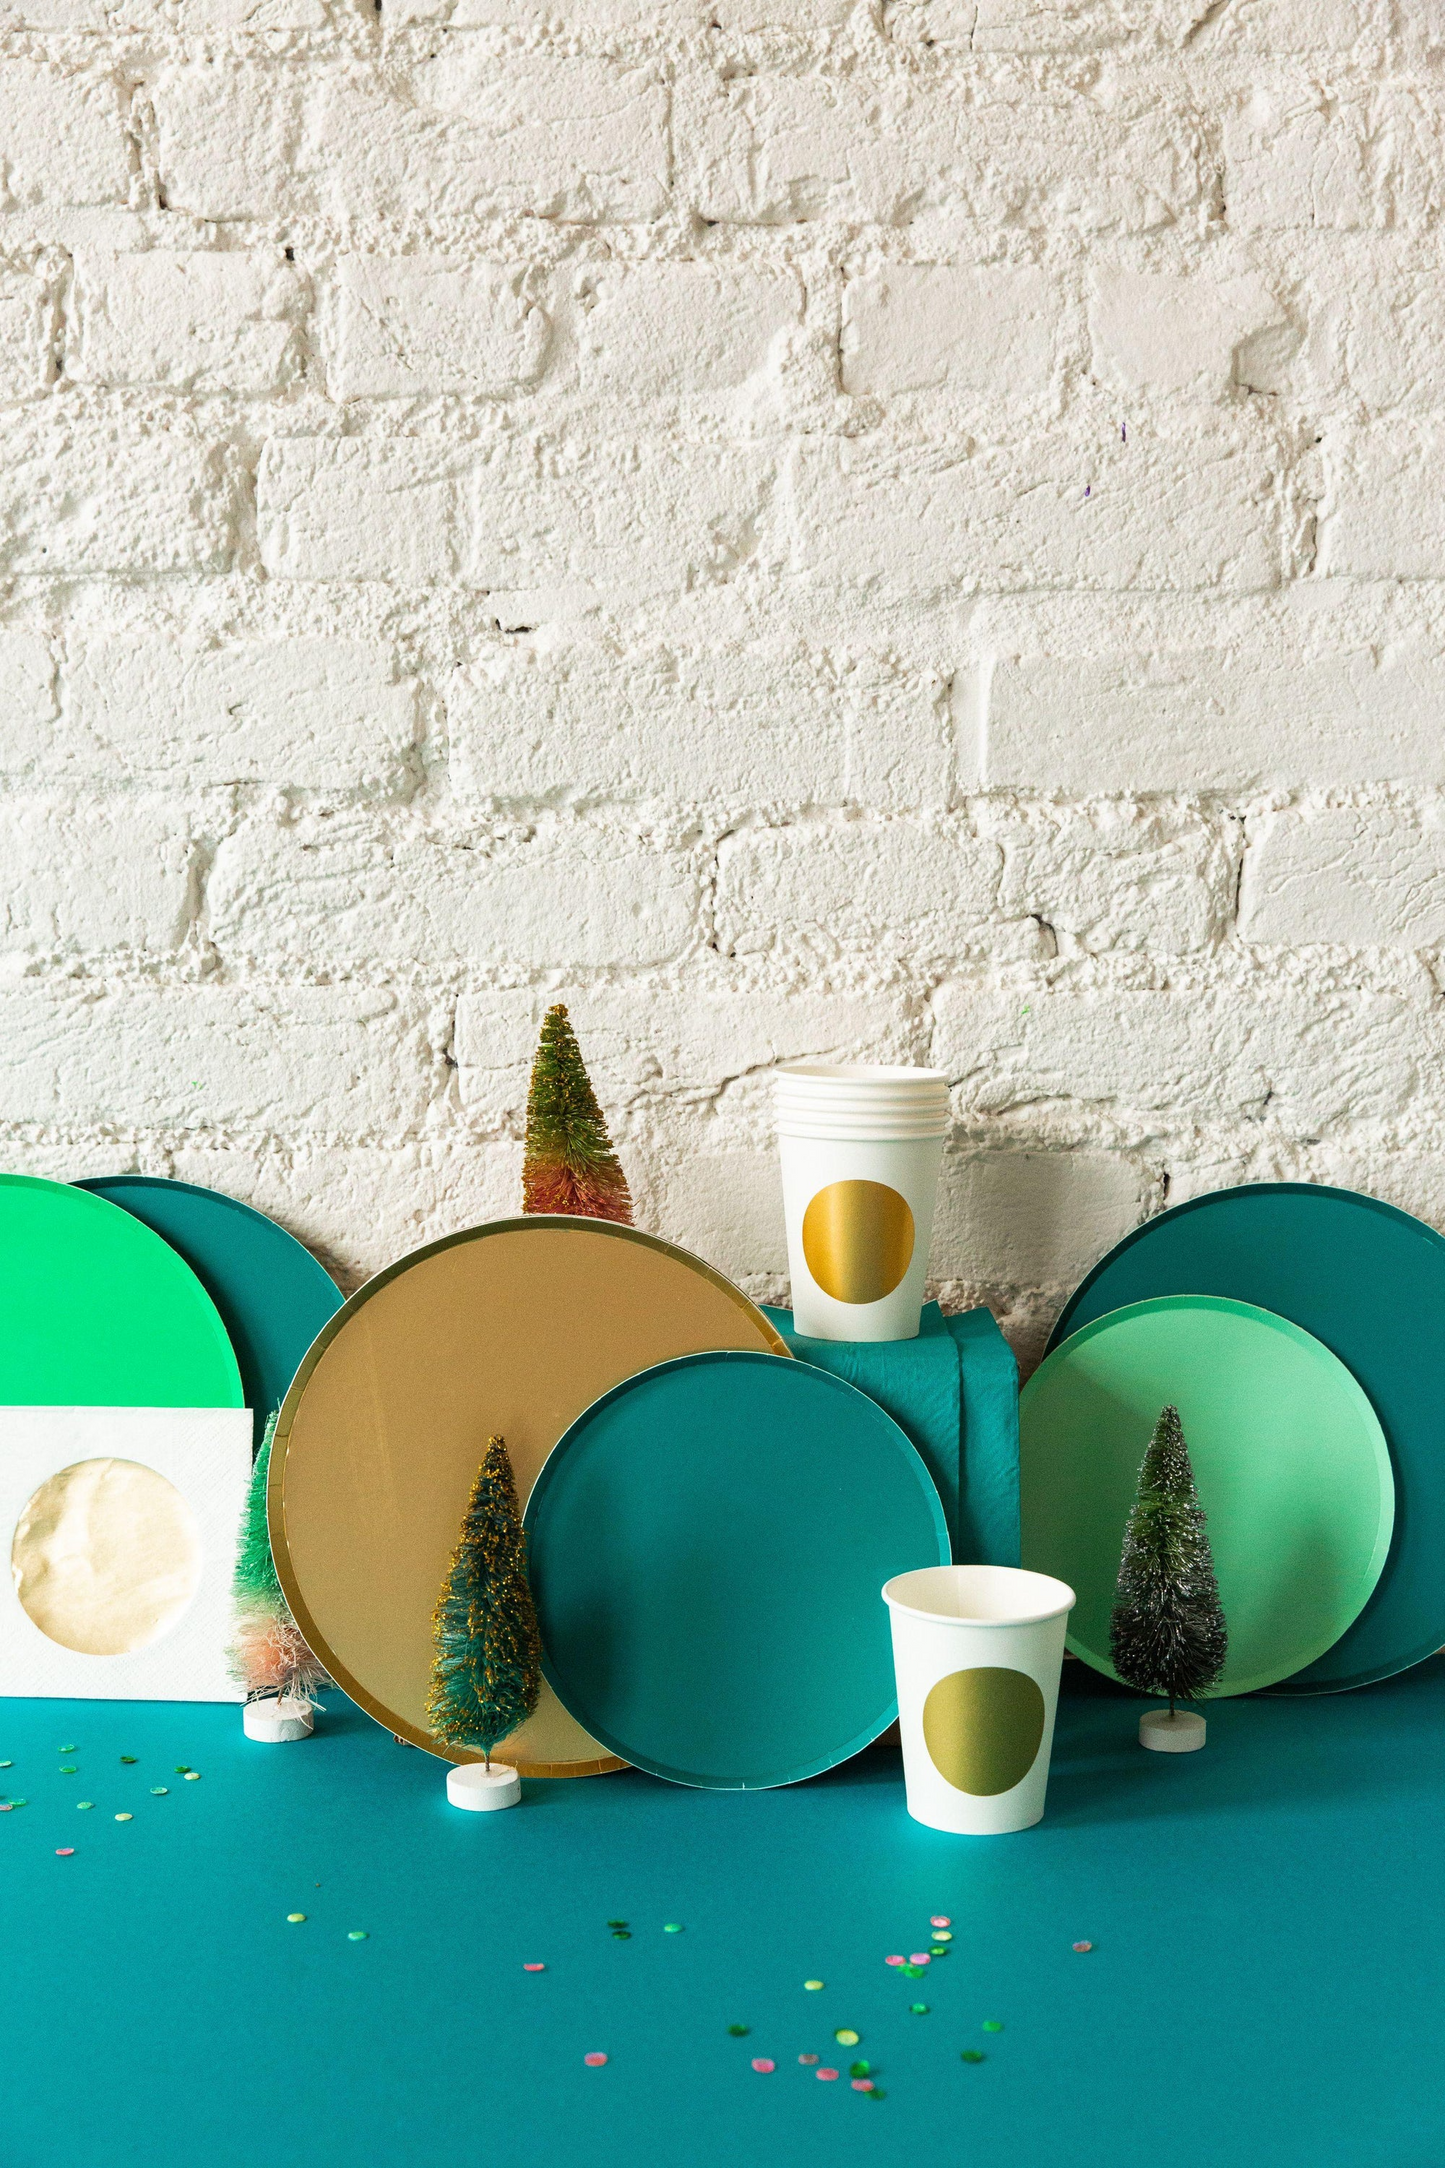 Small Low Rim Plates: Forest